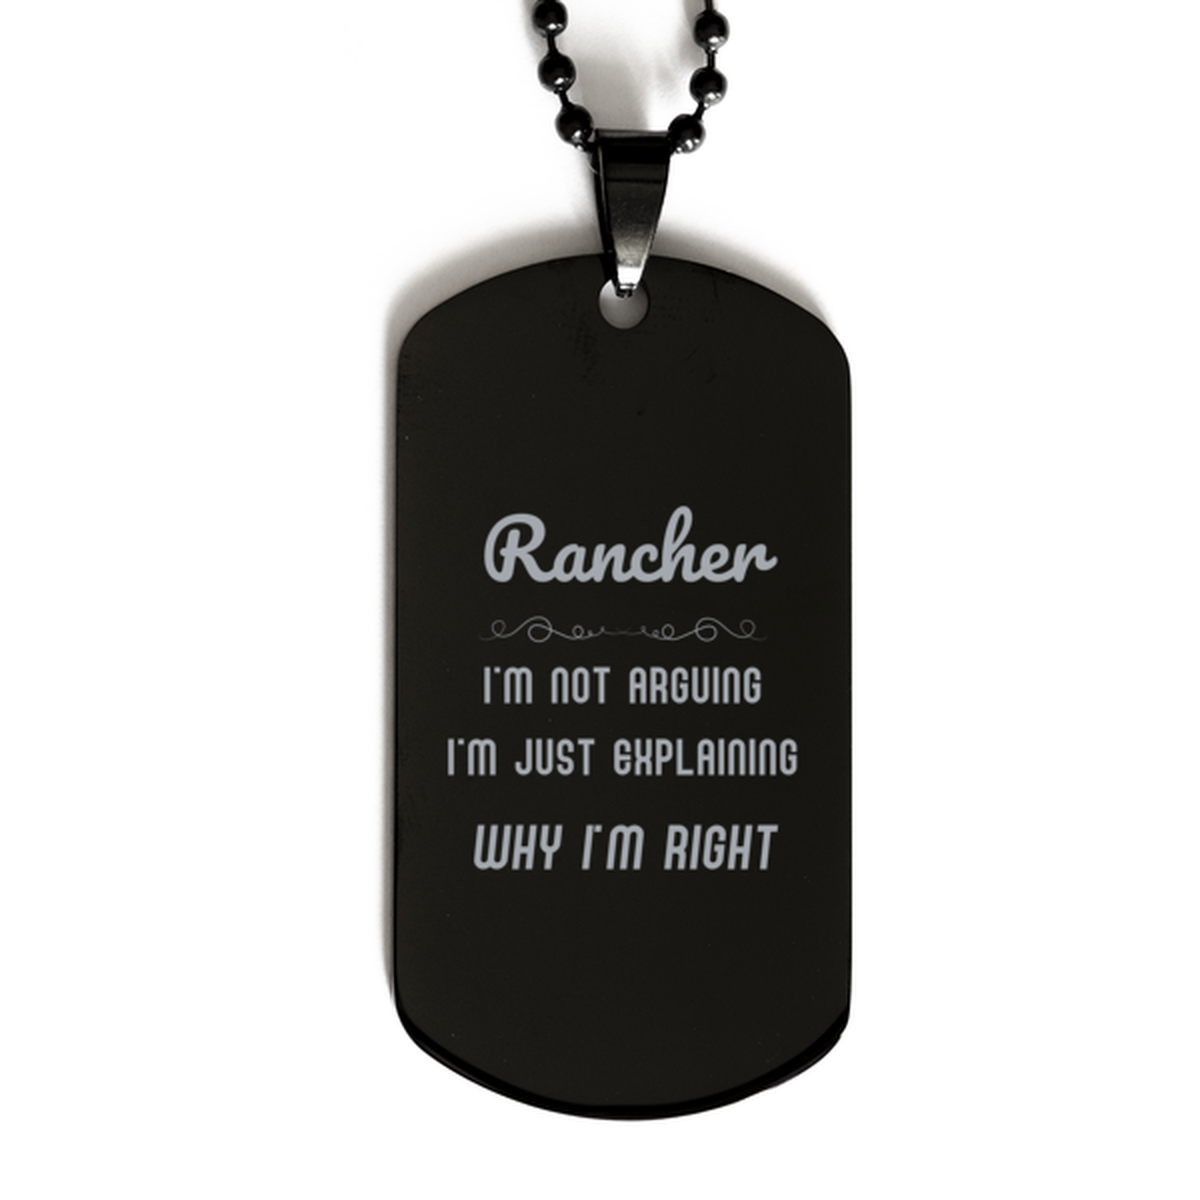 Rancher I'm not Arguing. I'm Just Explaining Why I'm RIGHT Black Dog Tag, Funny Saying Quote Rancher Gifts For Rancher Graduation Birthday Christmas Gifts for Men Women Coworker